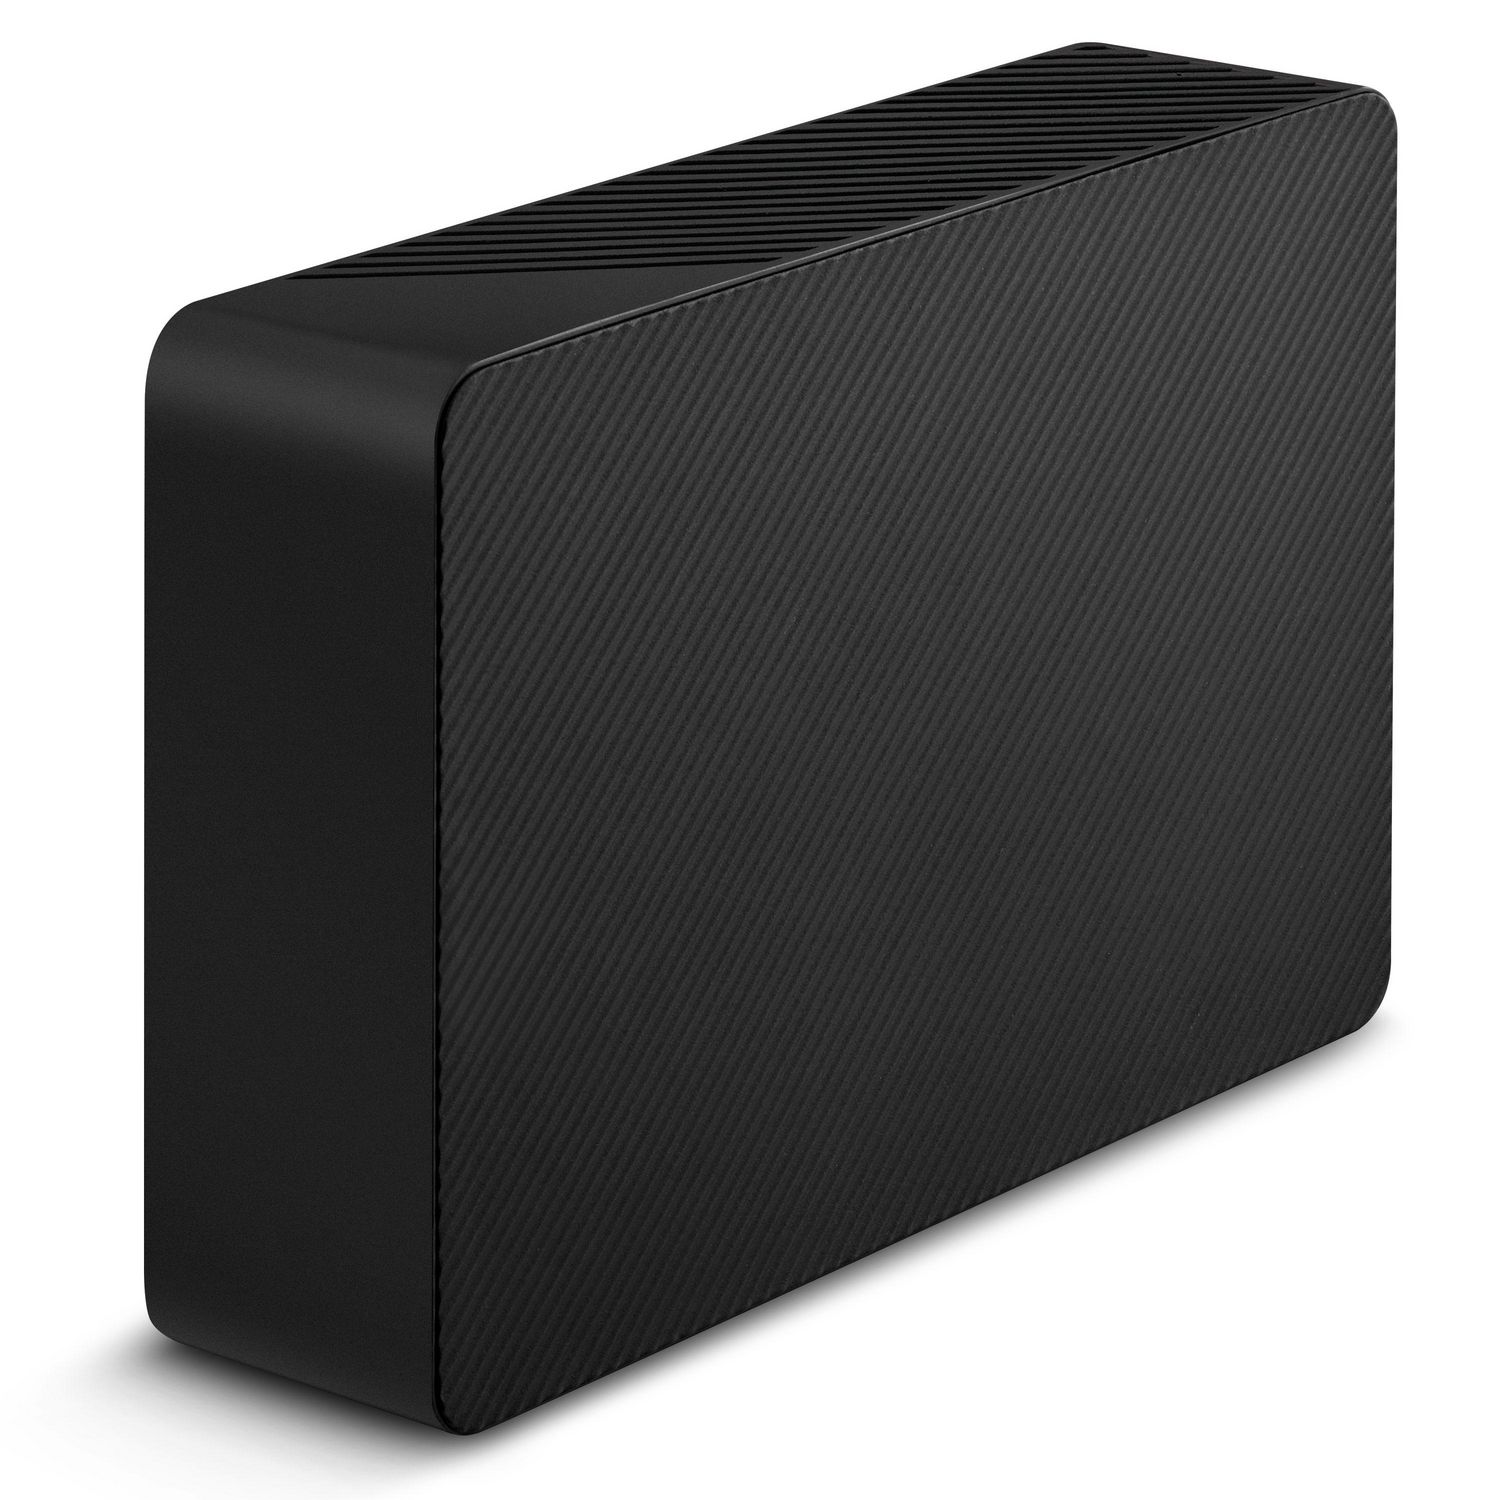 Seagate Expansion 4TB External Hard Drive HDD - USB 3.0, with